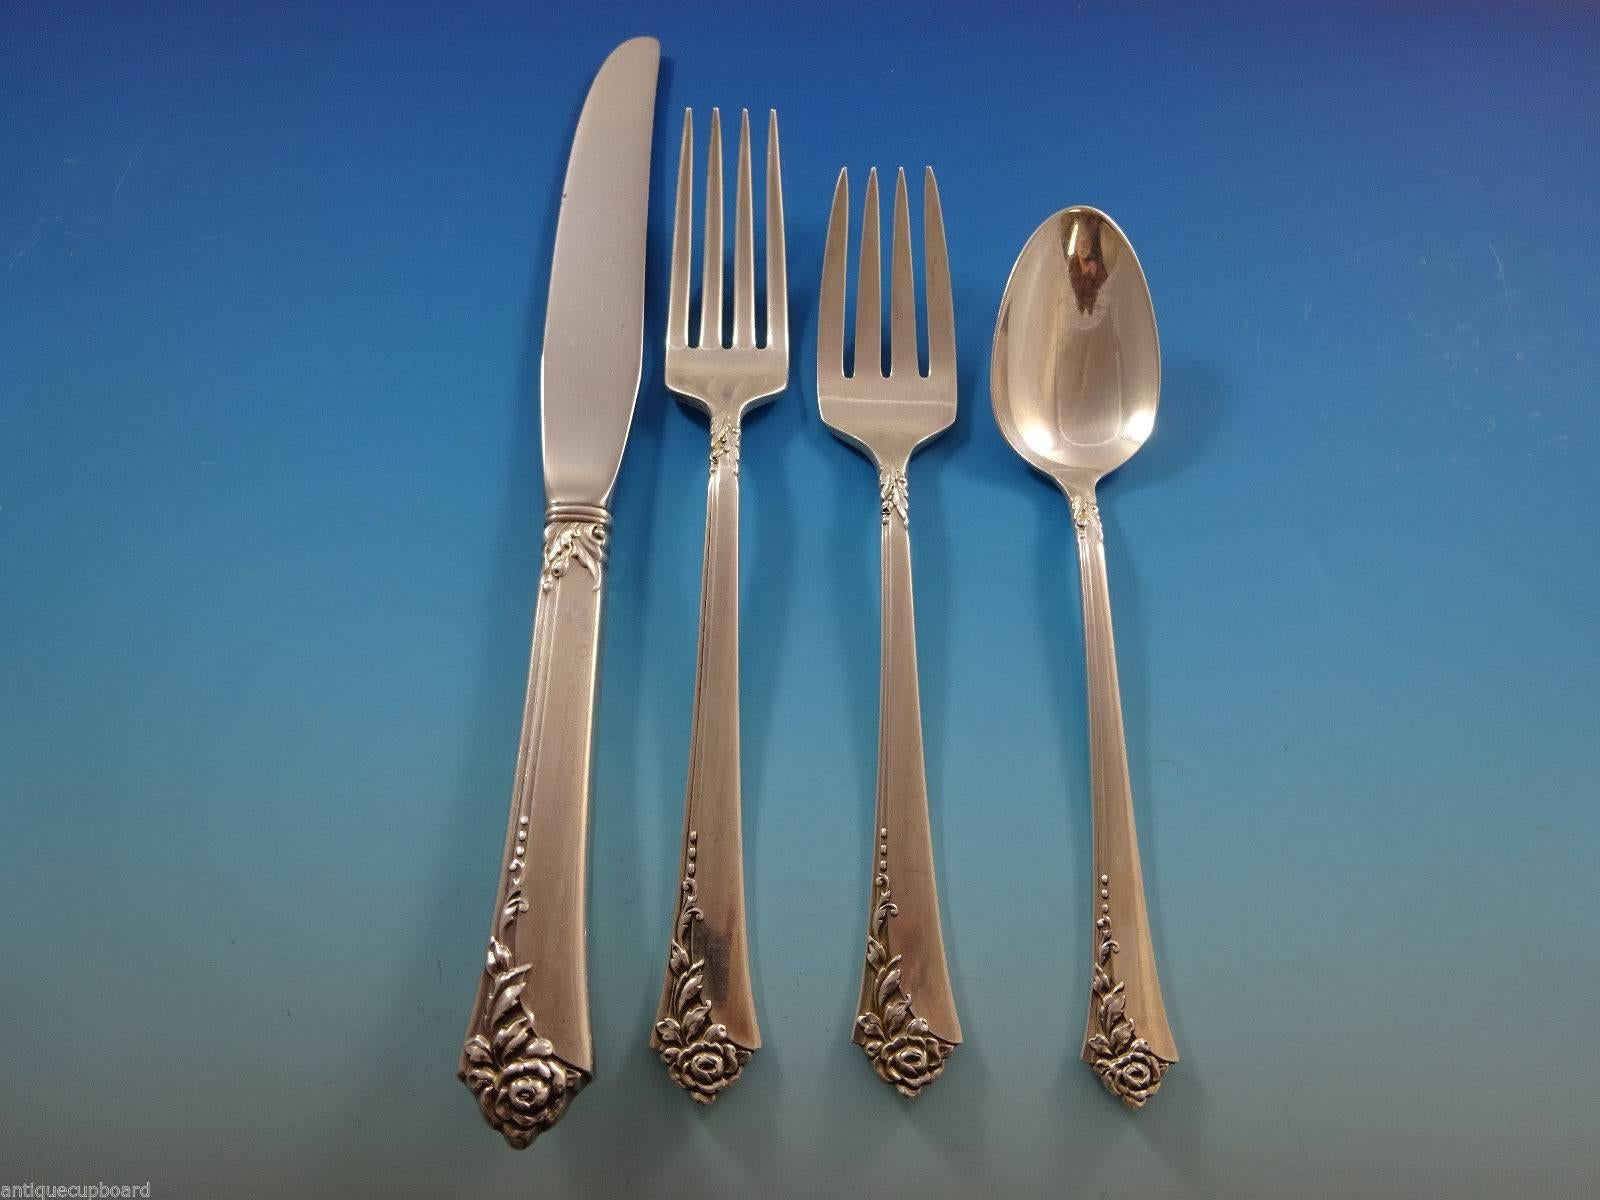 Damask Rose is a popular pattern that was released in the year 1946. The pattern has a three-dimensional rose motif with a modern twist.

Damask Rose by Oneida sterling silver flatware set, 48 pieces. This set includes:

12 knives, 9